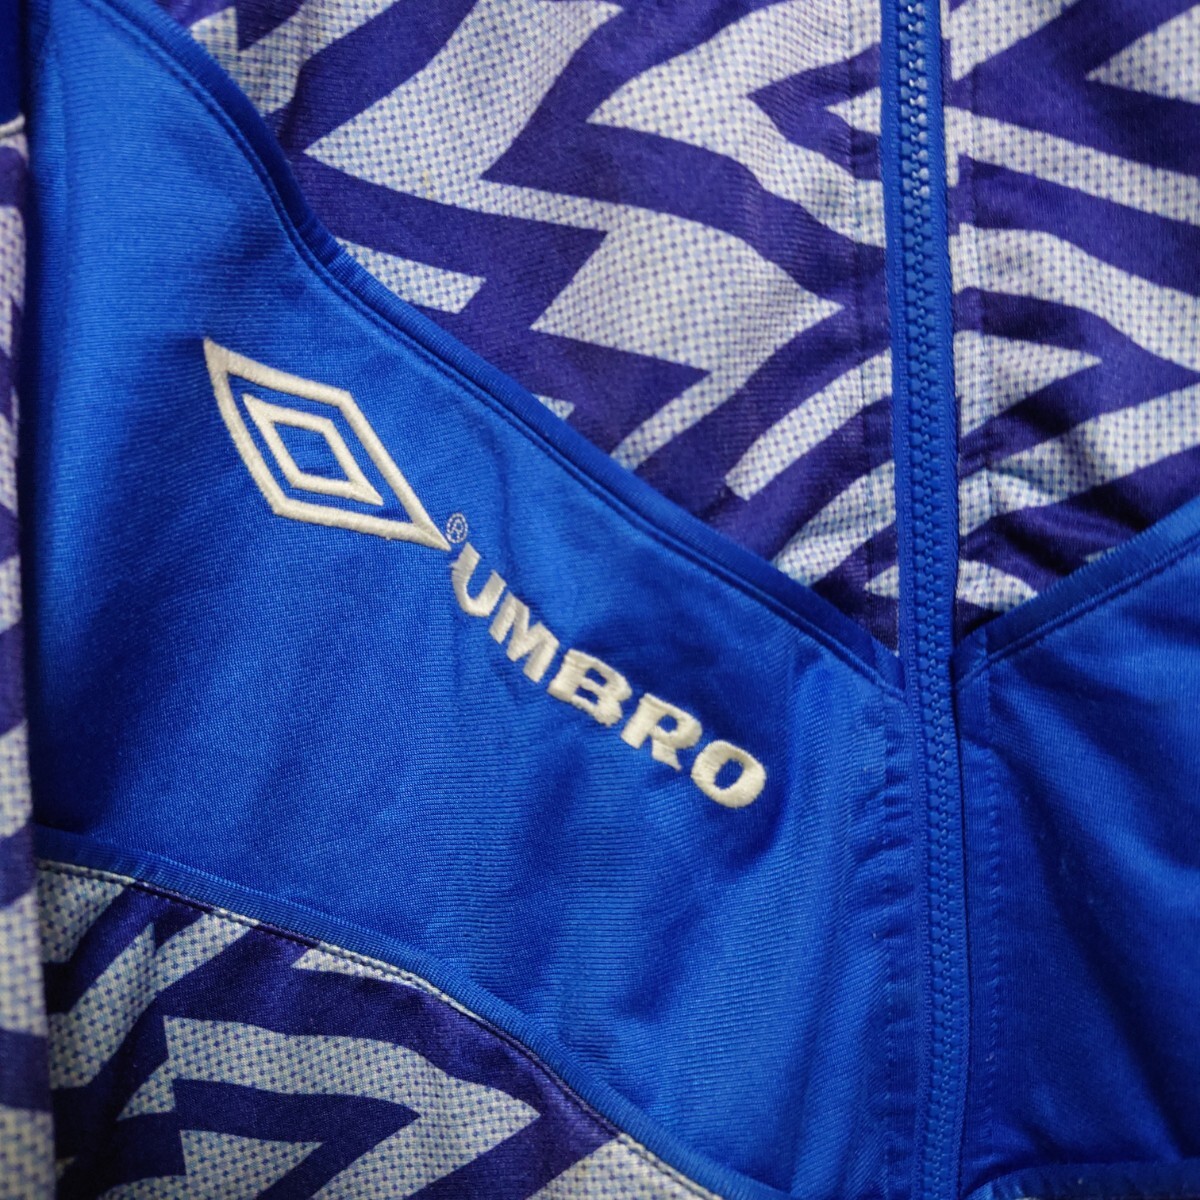 UMBRO Umbro 90s jersey jersey . hand geometrical pattern embroidery Logo one point thing 